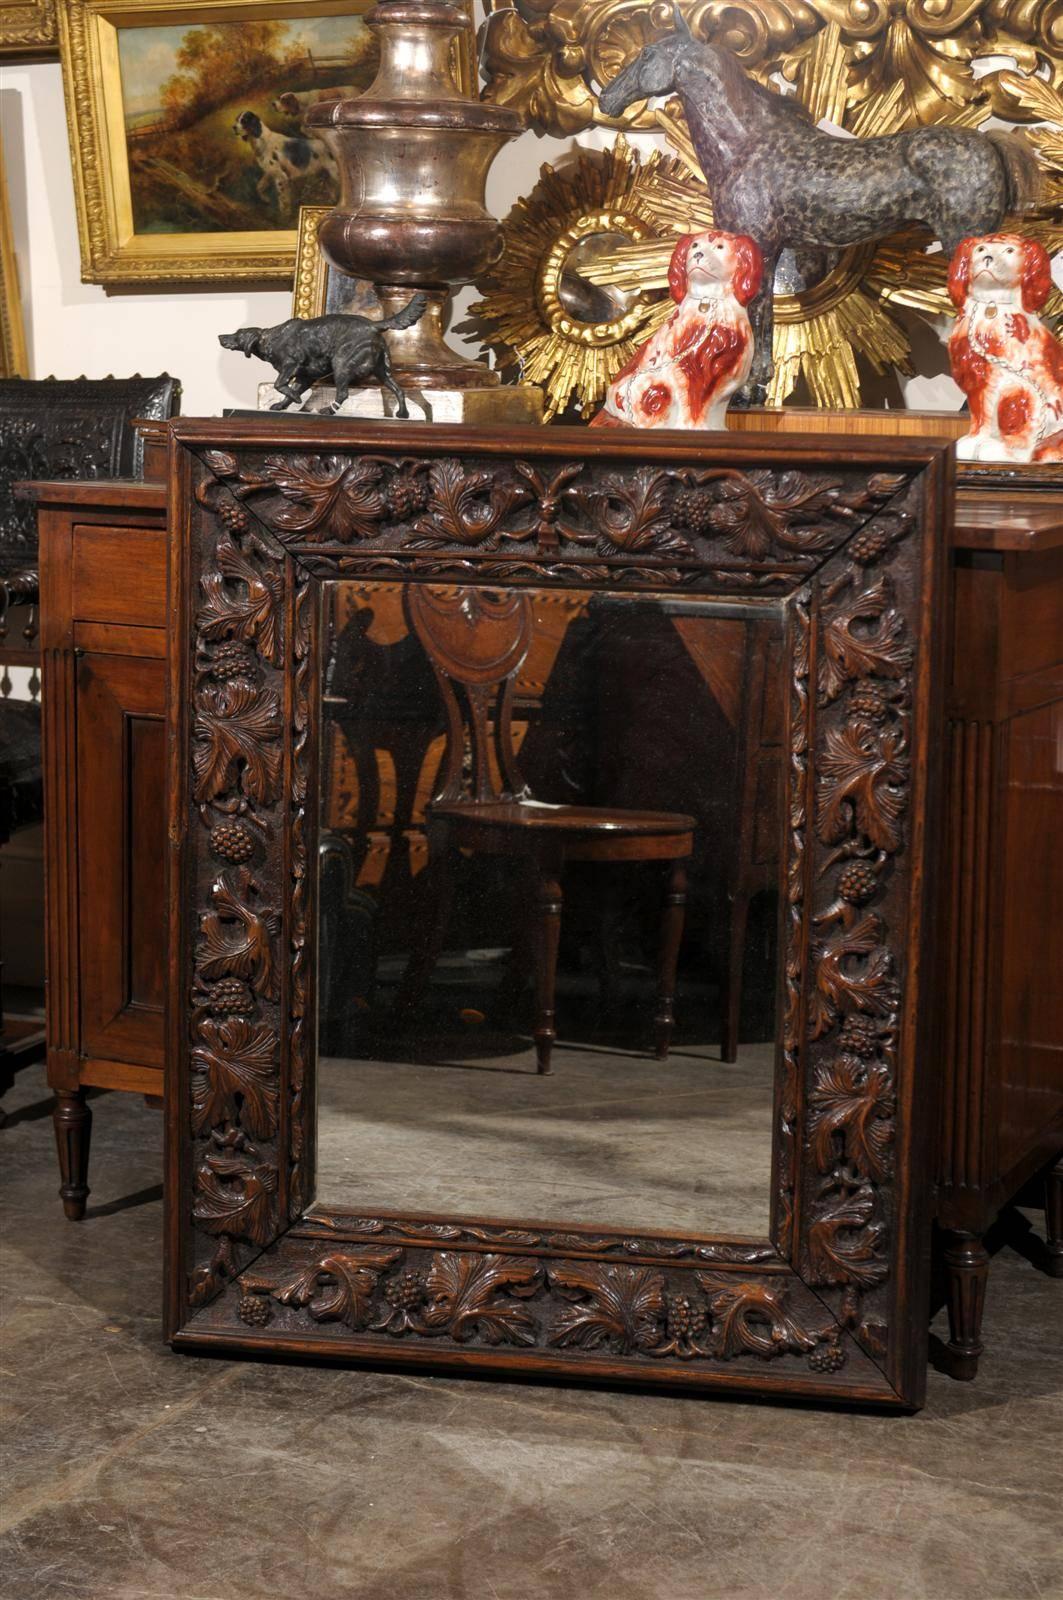 This German Black Forest mirror from the late 19th century features a rectangular frame with skillfully carved foliate motifs on the surround. The molding closest to the mirrored section is also discreetly carved, giving a visual pause before the